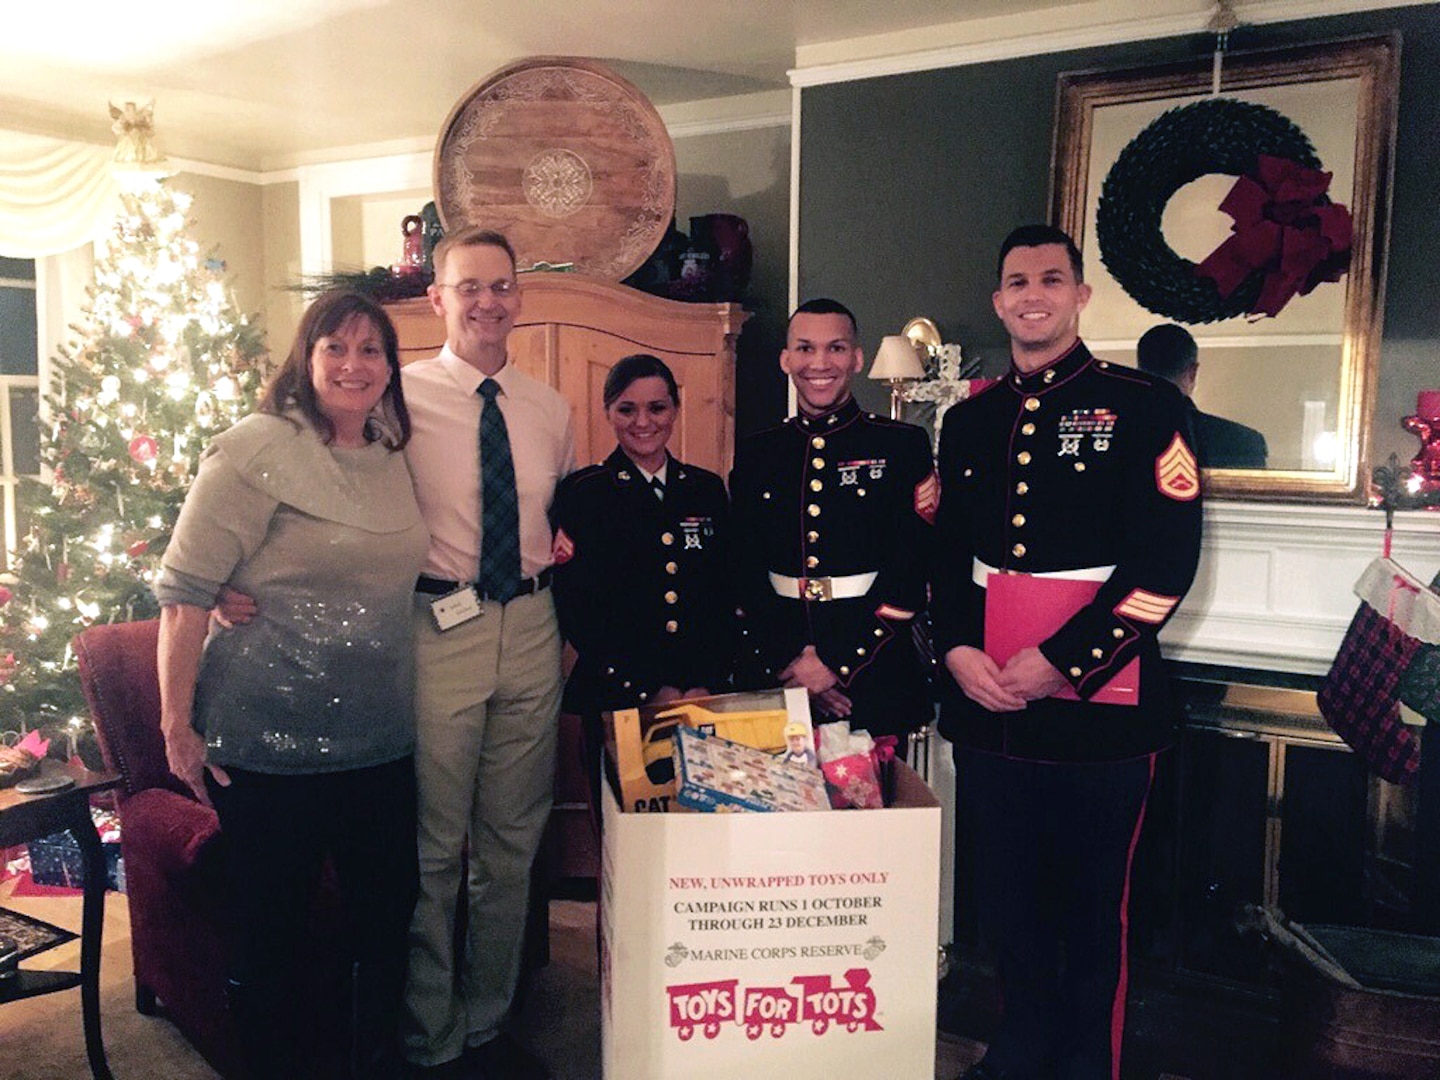 Toys for Tots donations are collected by, from left to right, Laura McLeod, Air Force Brig. Gen. Mark McLeod, Marine Cpl. Chelsea Propes, Marine Sgt. Robert Bradley and Marine Staff Sgt. Andrew Eichelberger. Defense Logistics Agency Energy employees contributed more than 150 toys during the DLA Energy commander’s holiday reception at Fort Belvoir, Virginia, Dec. 19.